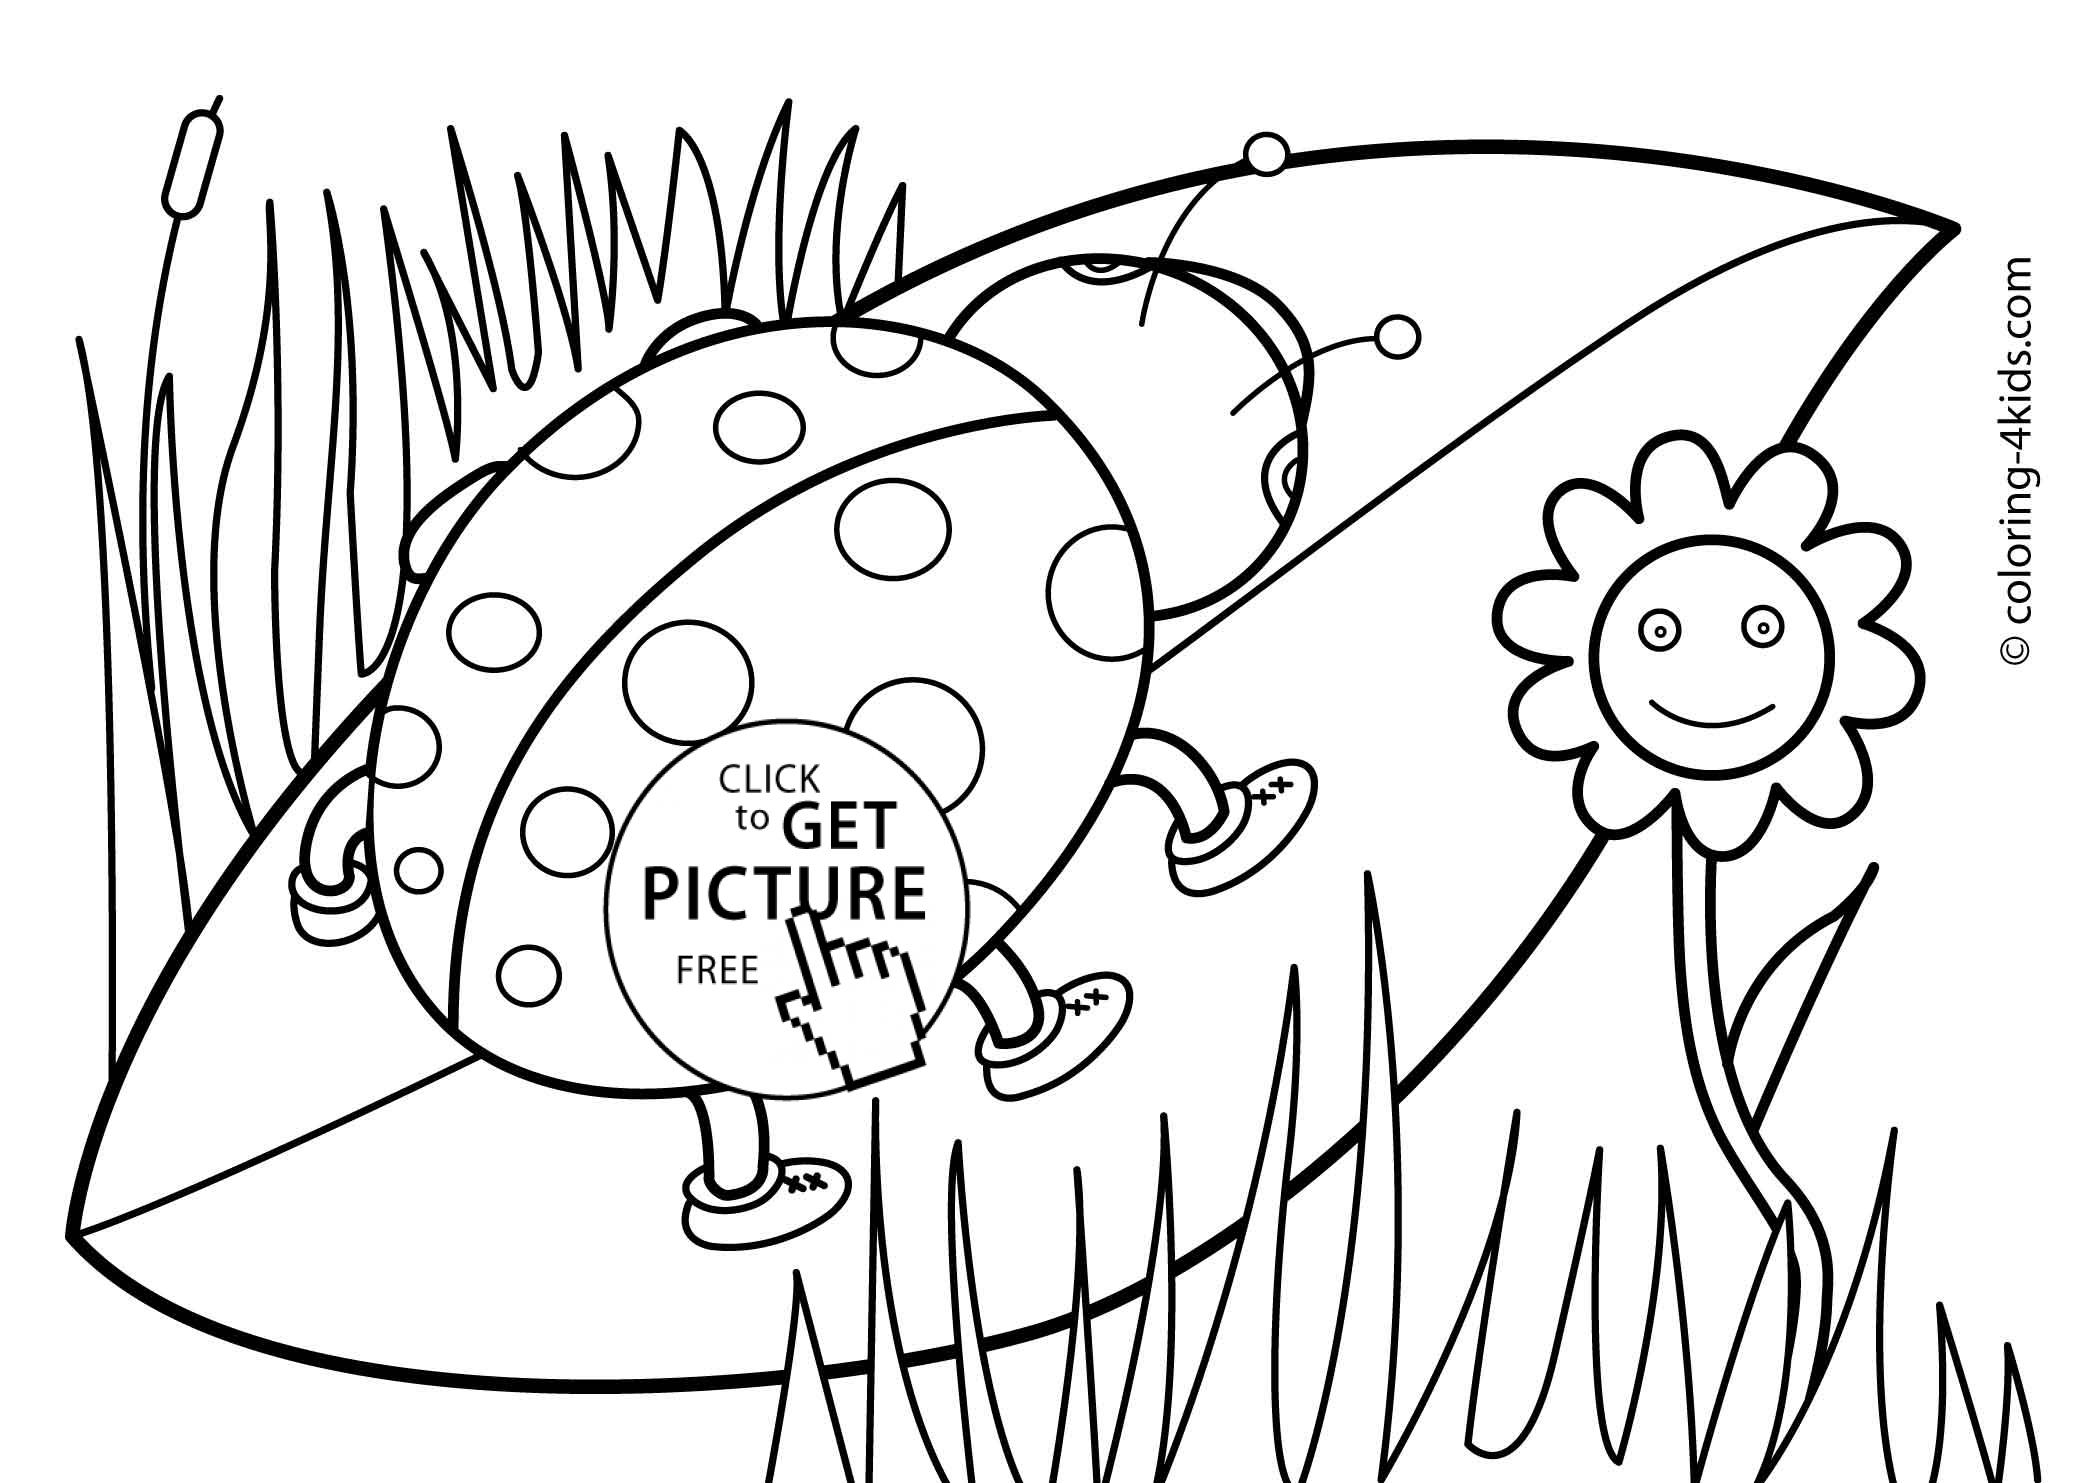 Spring Coloring Pages For Kids, Free Printable - Free Printable Spring Coloring Pages For Adults